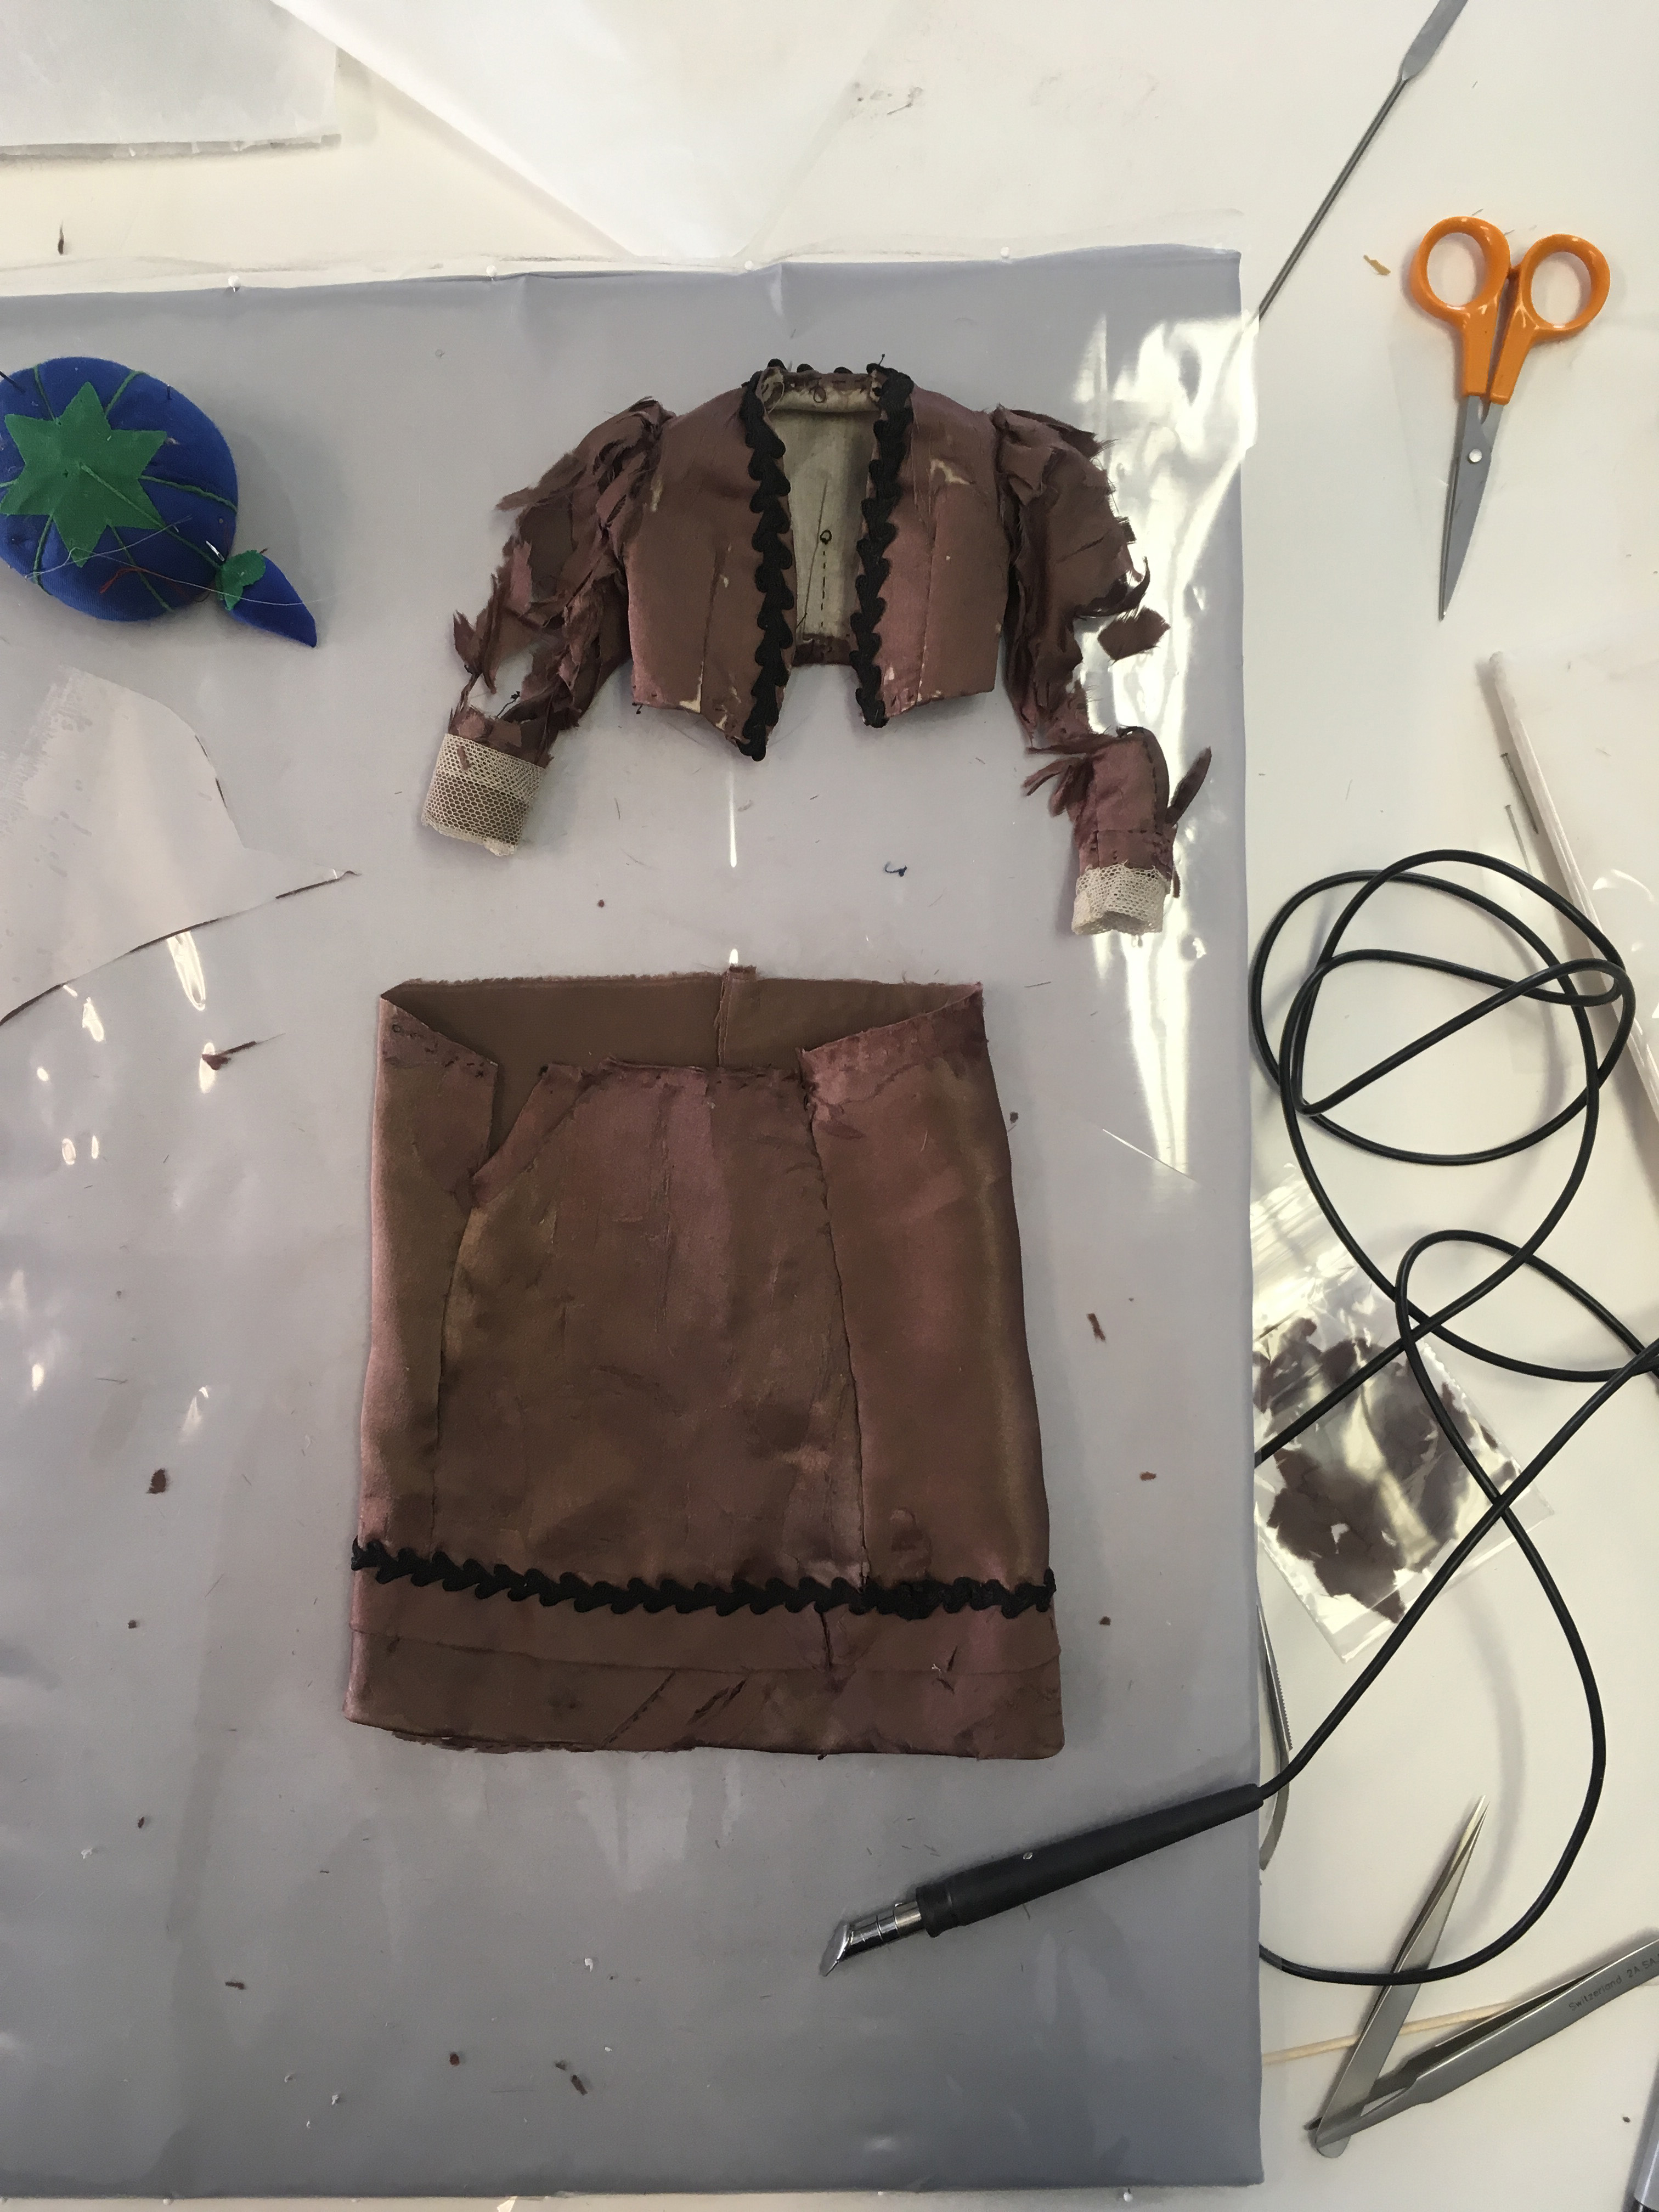 clothing of a doll in conservation